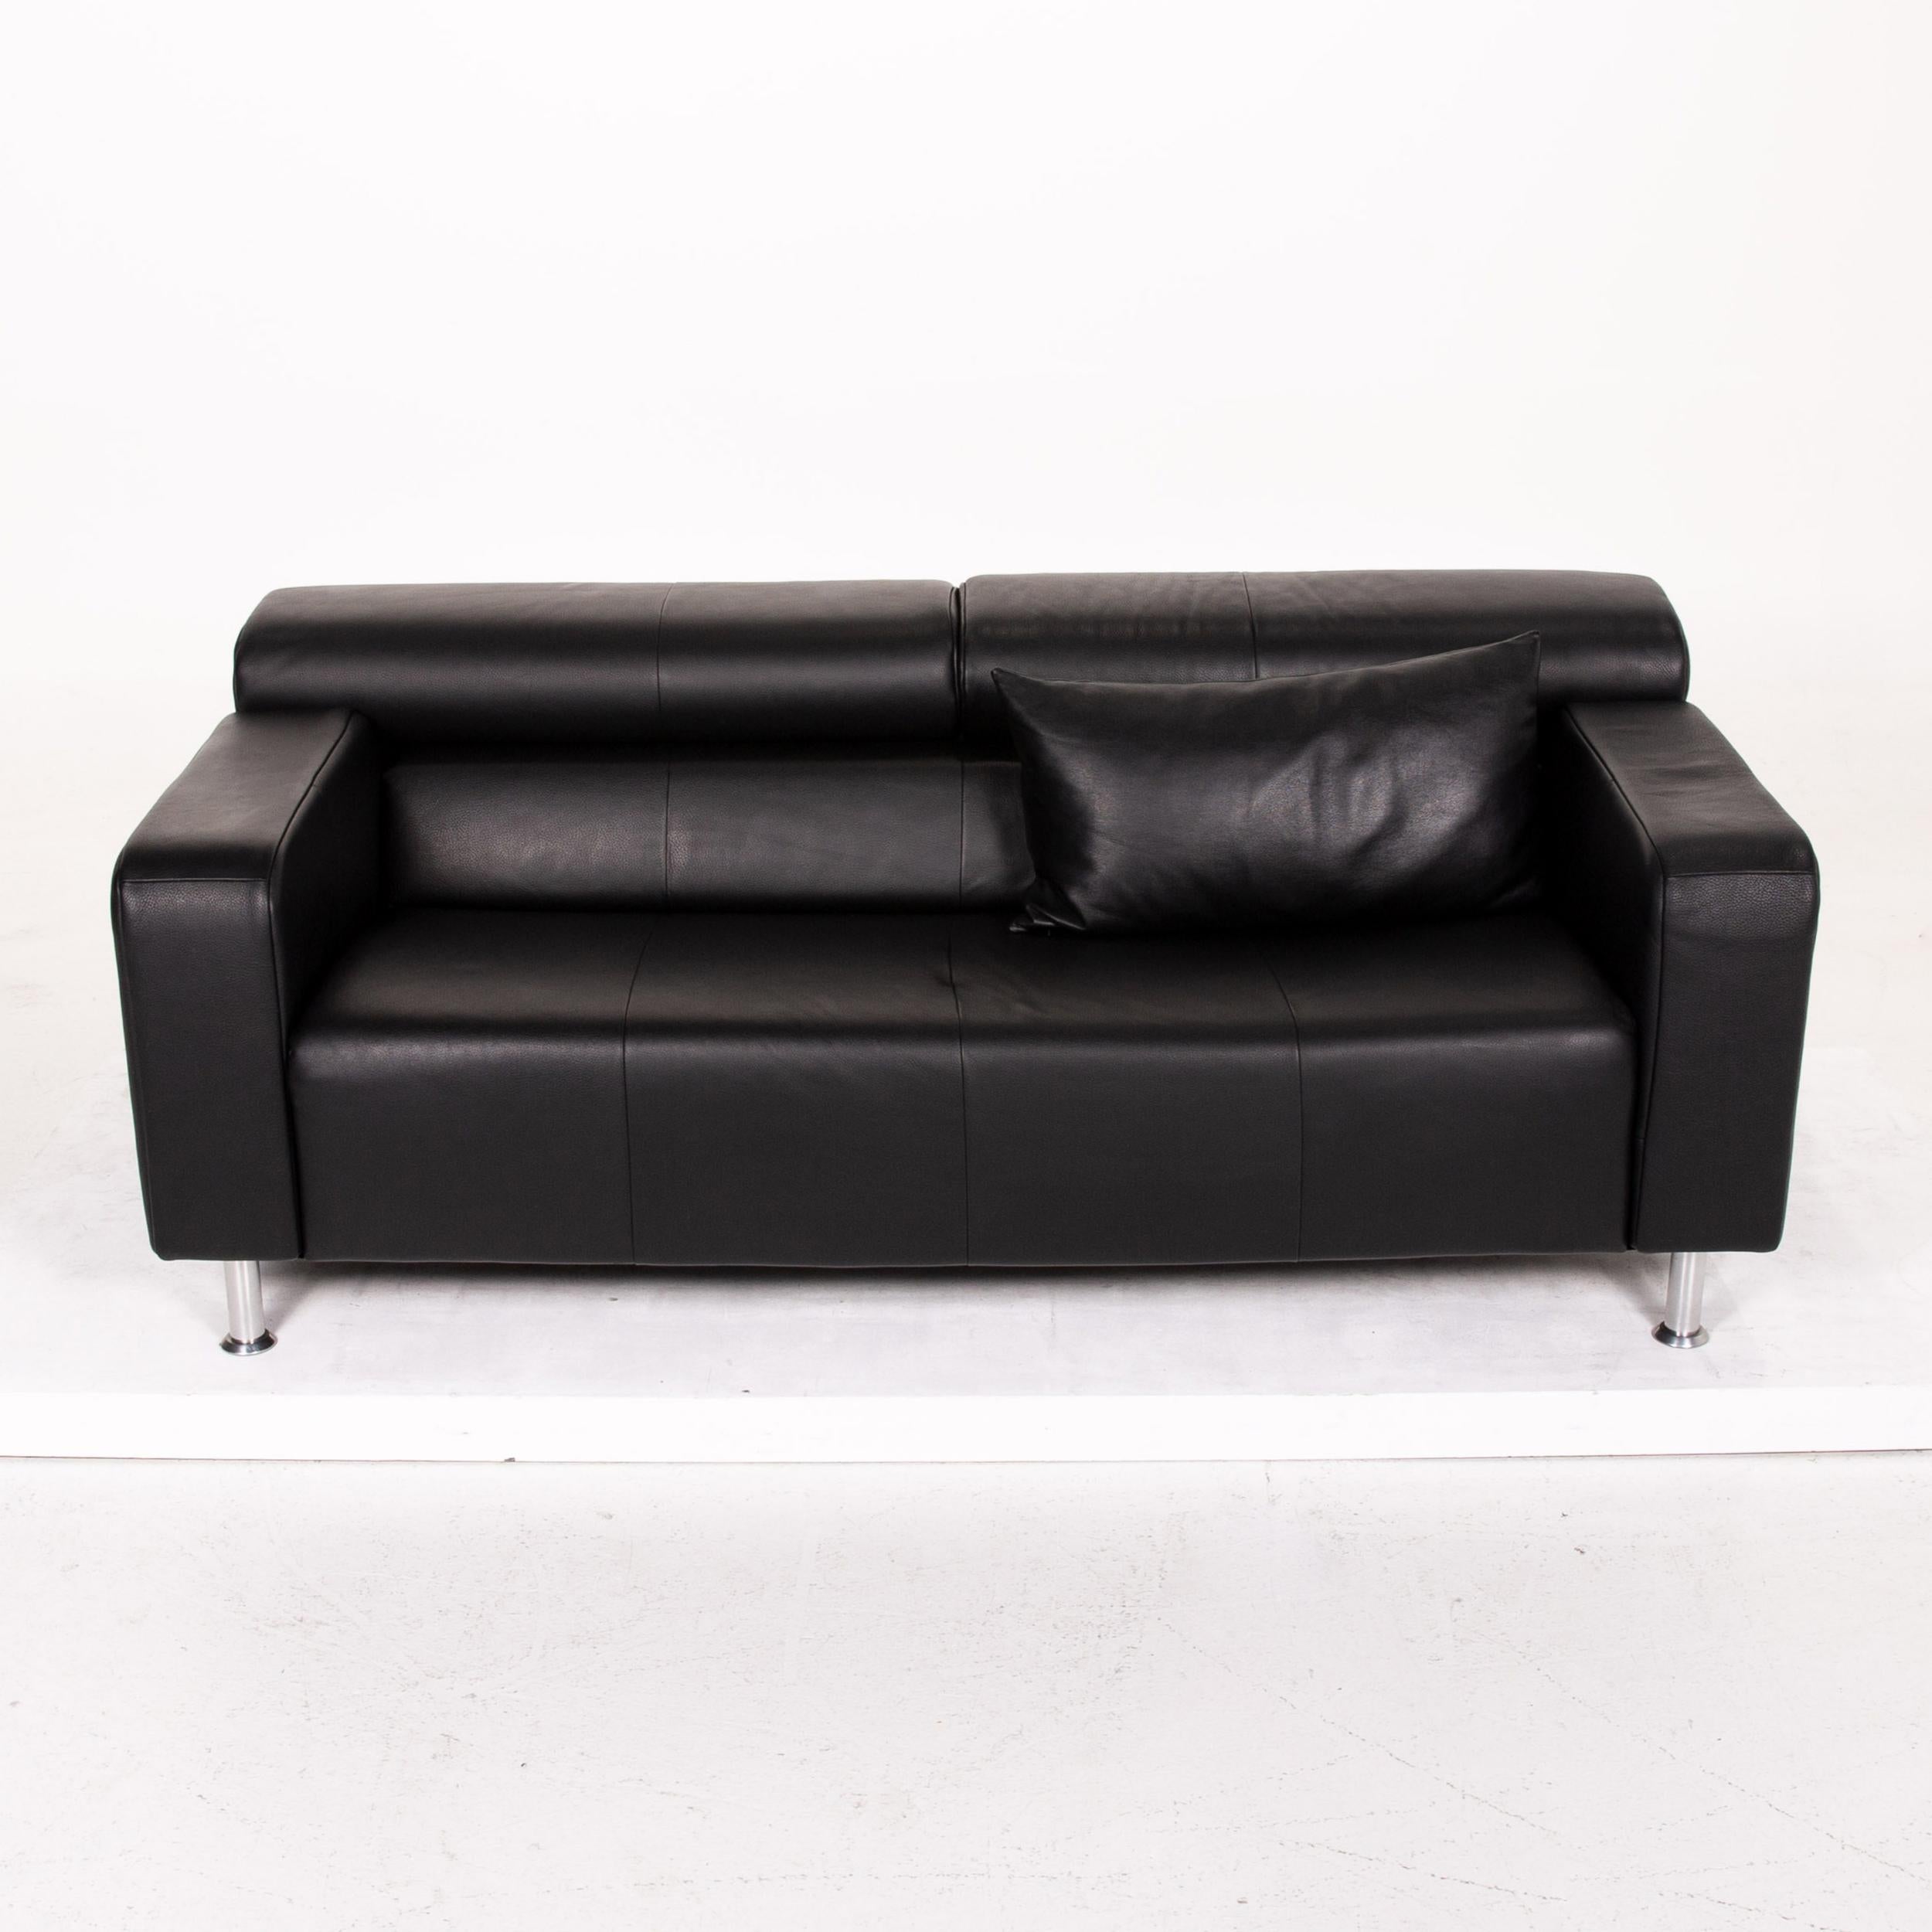 Rolf Benz AK 422 Leather Sofa Black Three-Seat Couch For Sale 8